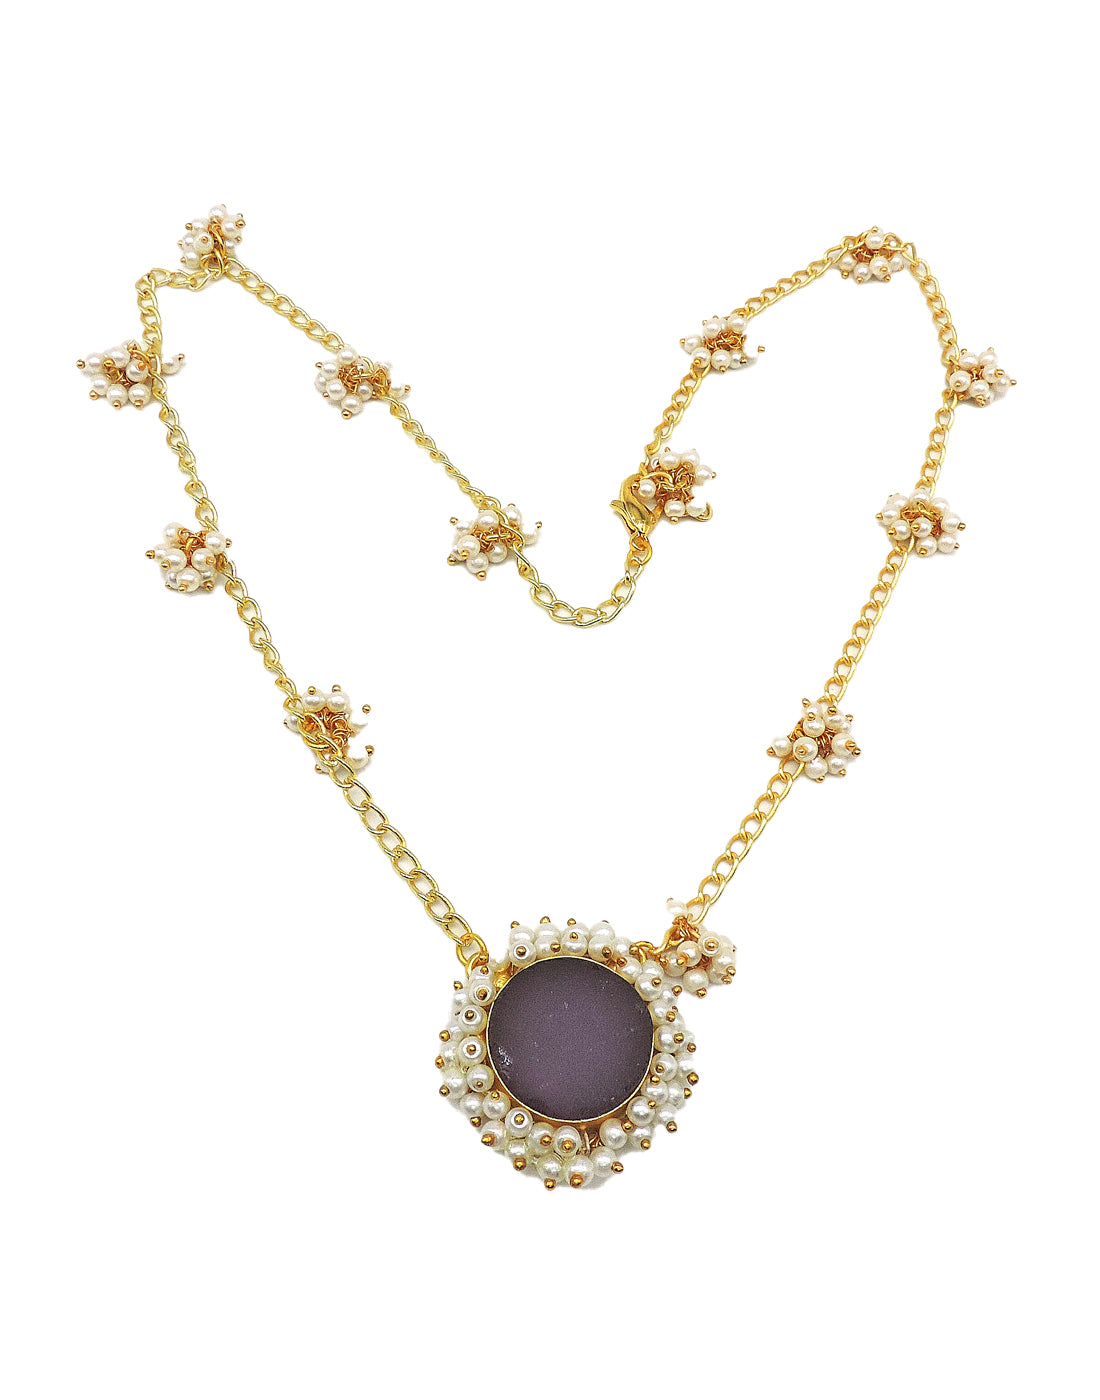 Bloom Necklace (Amethyst) - Statement Necklaces - Gold-Plated & Hypoallergenic Jewellery - Made in India - Dubai Jewellery - Dori